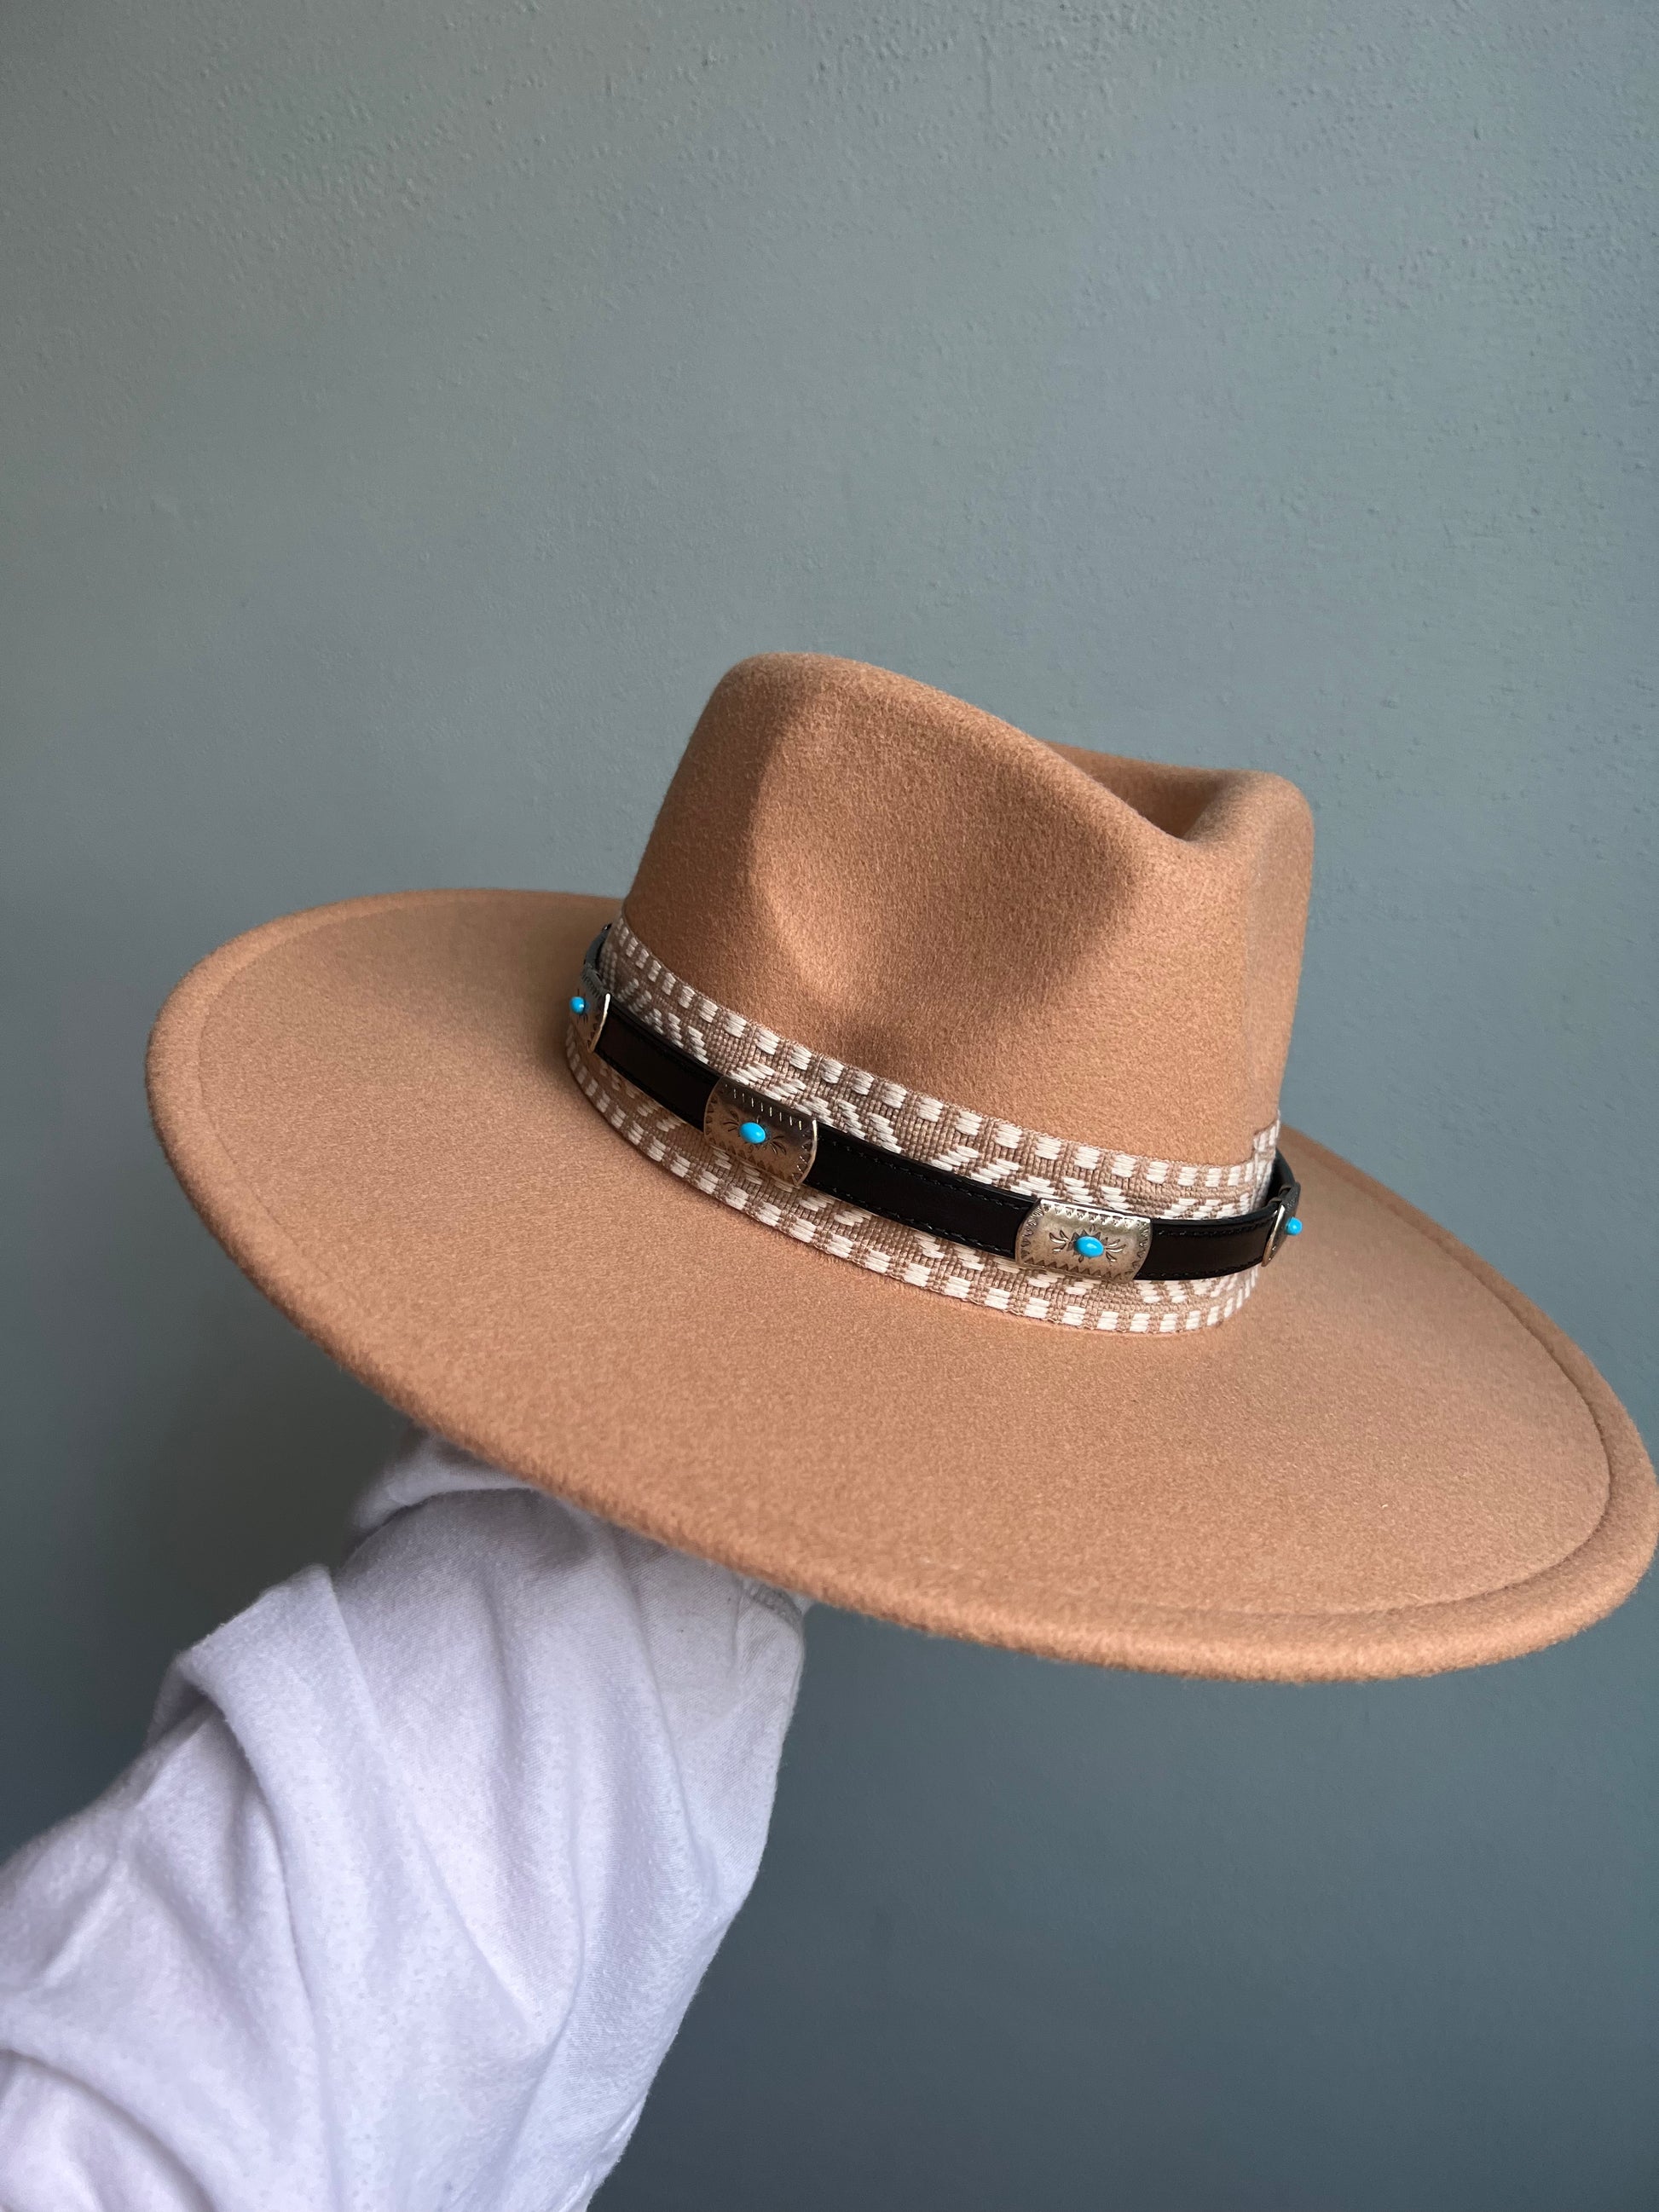 The LV Hat Band – The Turquoise Pistol